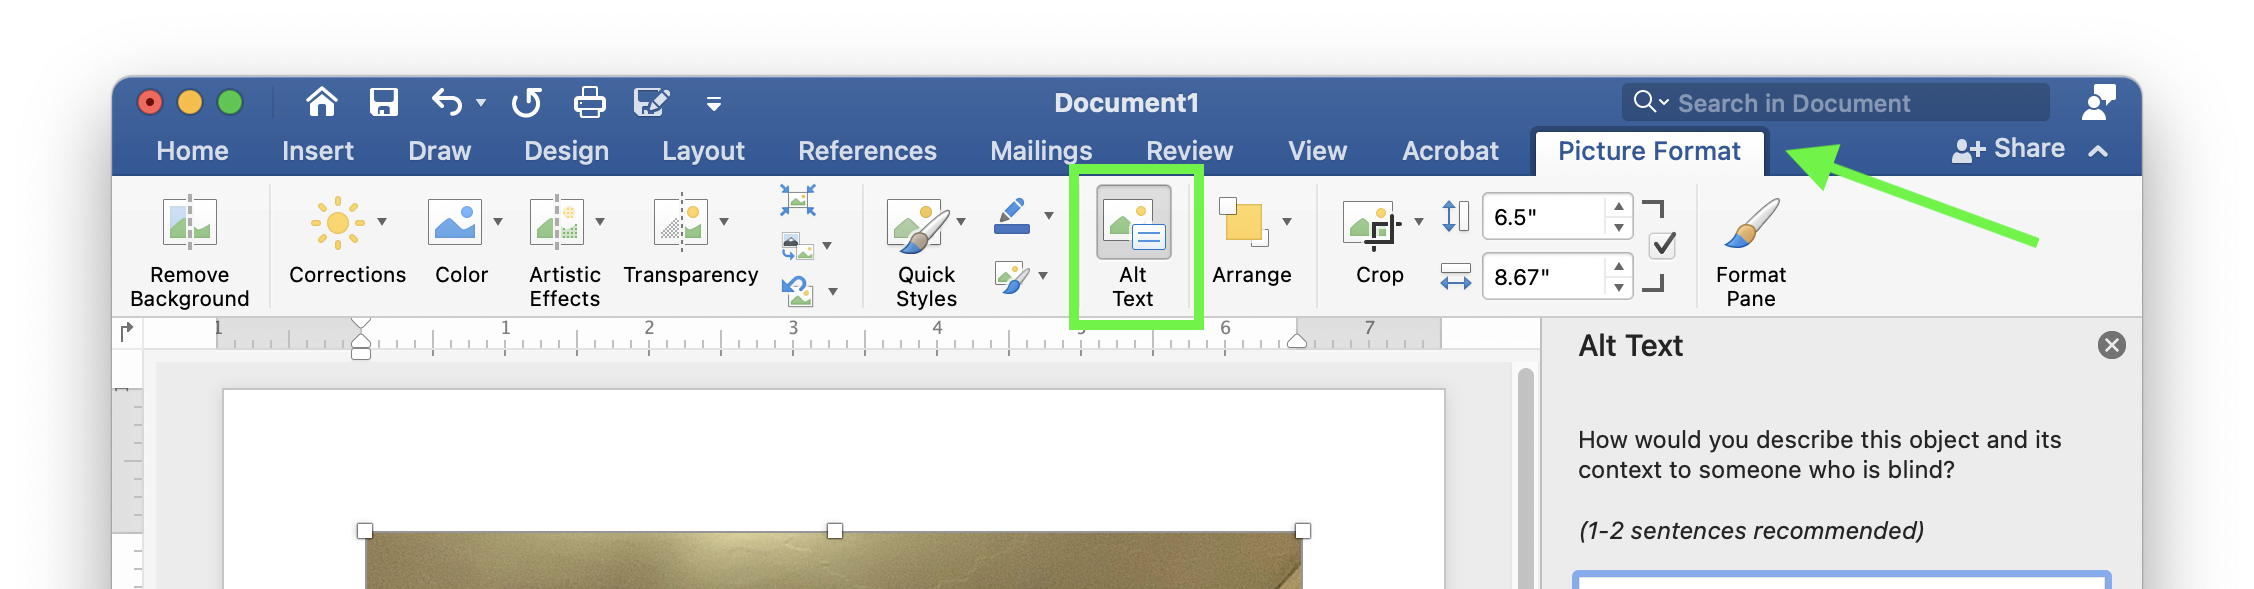 Image of Microsoft Word's Picture Format pane with a green box highlighting Alt Text.